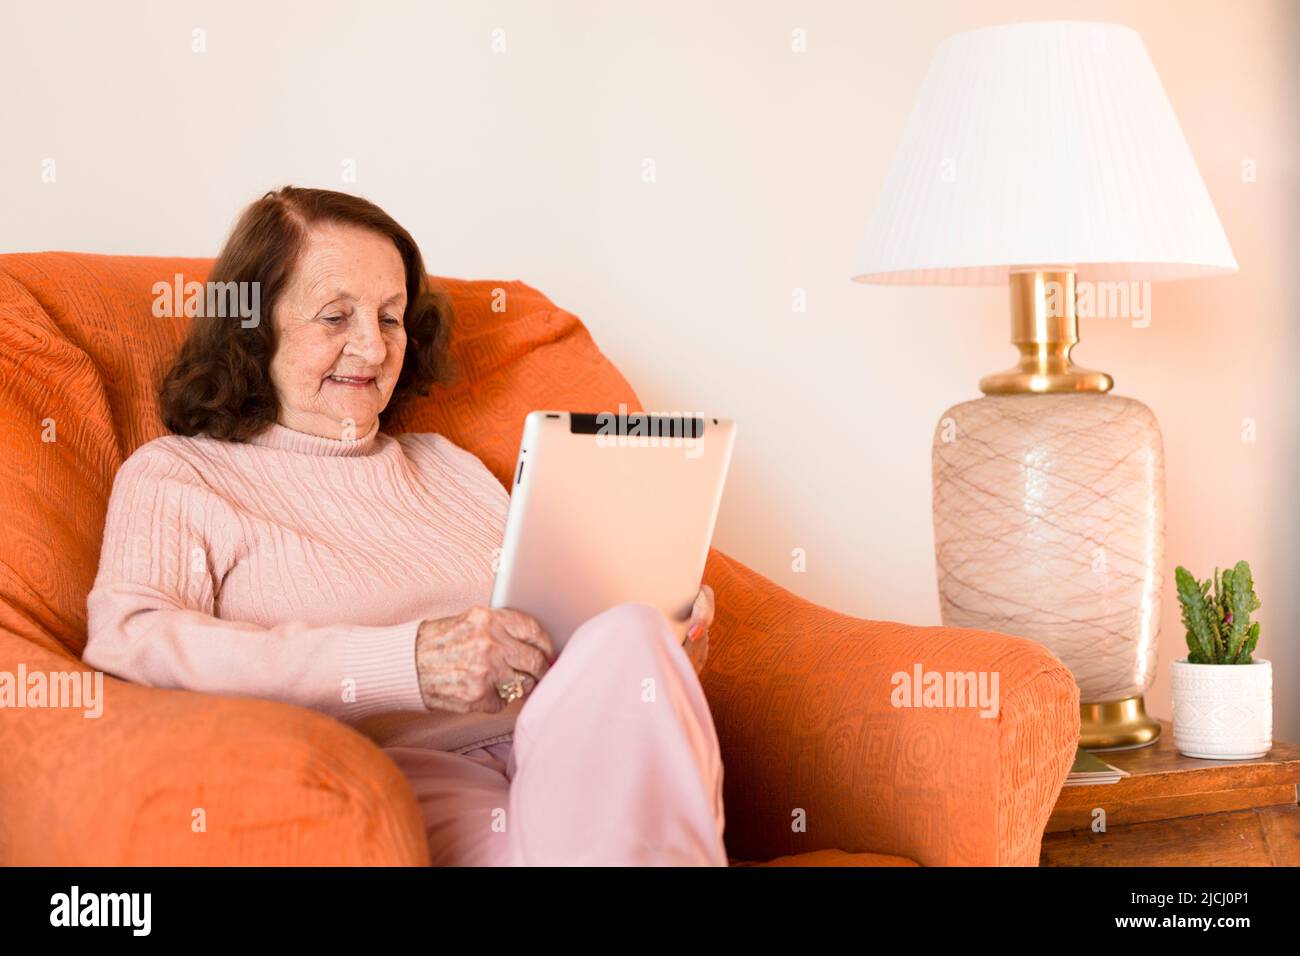 Elderly Caucasian woman using digital tablet at home. Concept of technology and senior citizens. Space for text. Stock Photo